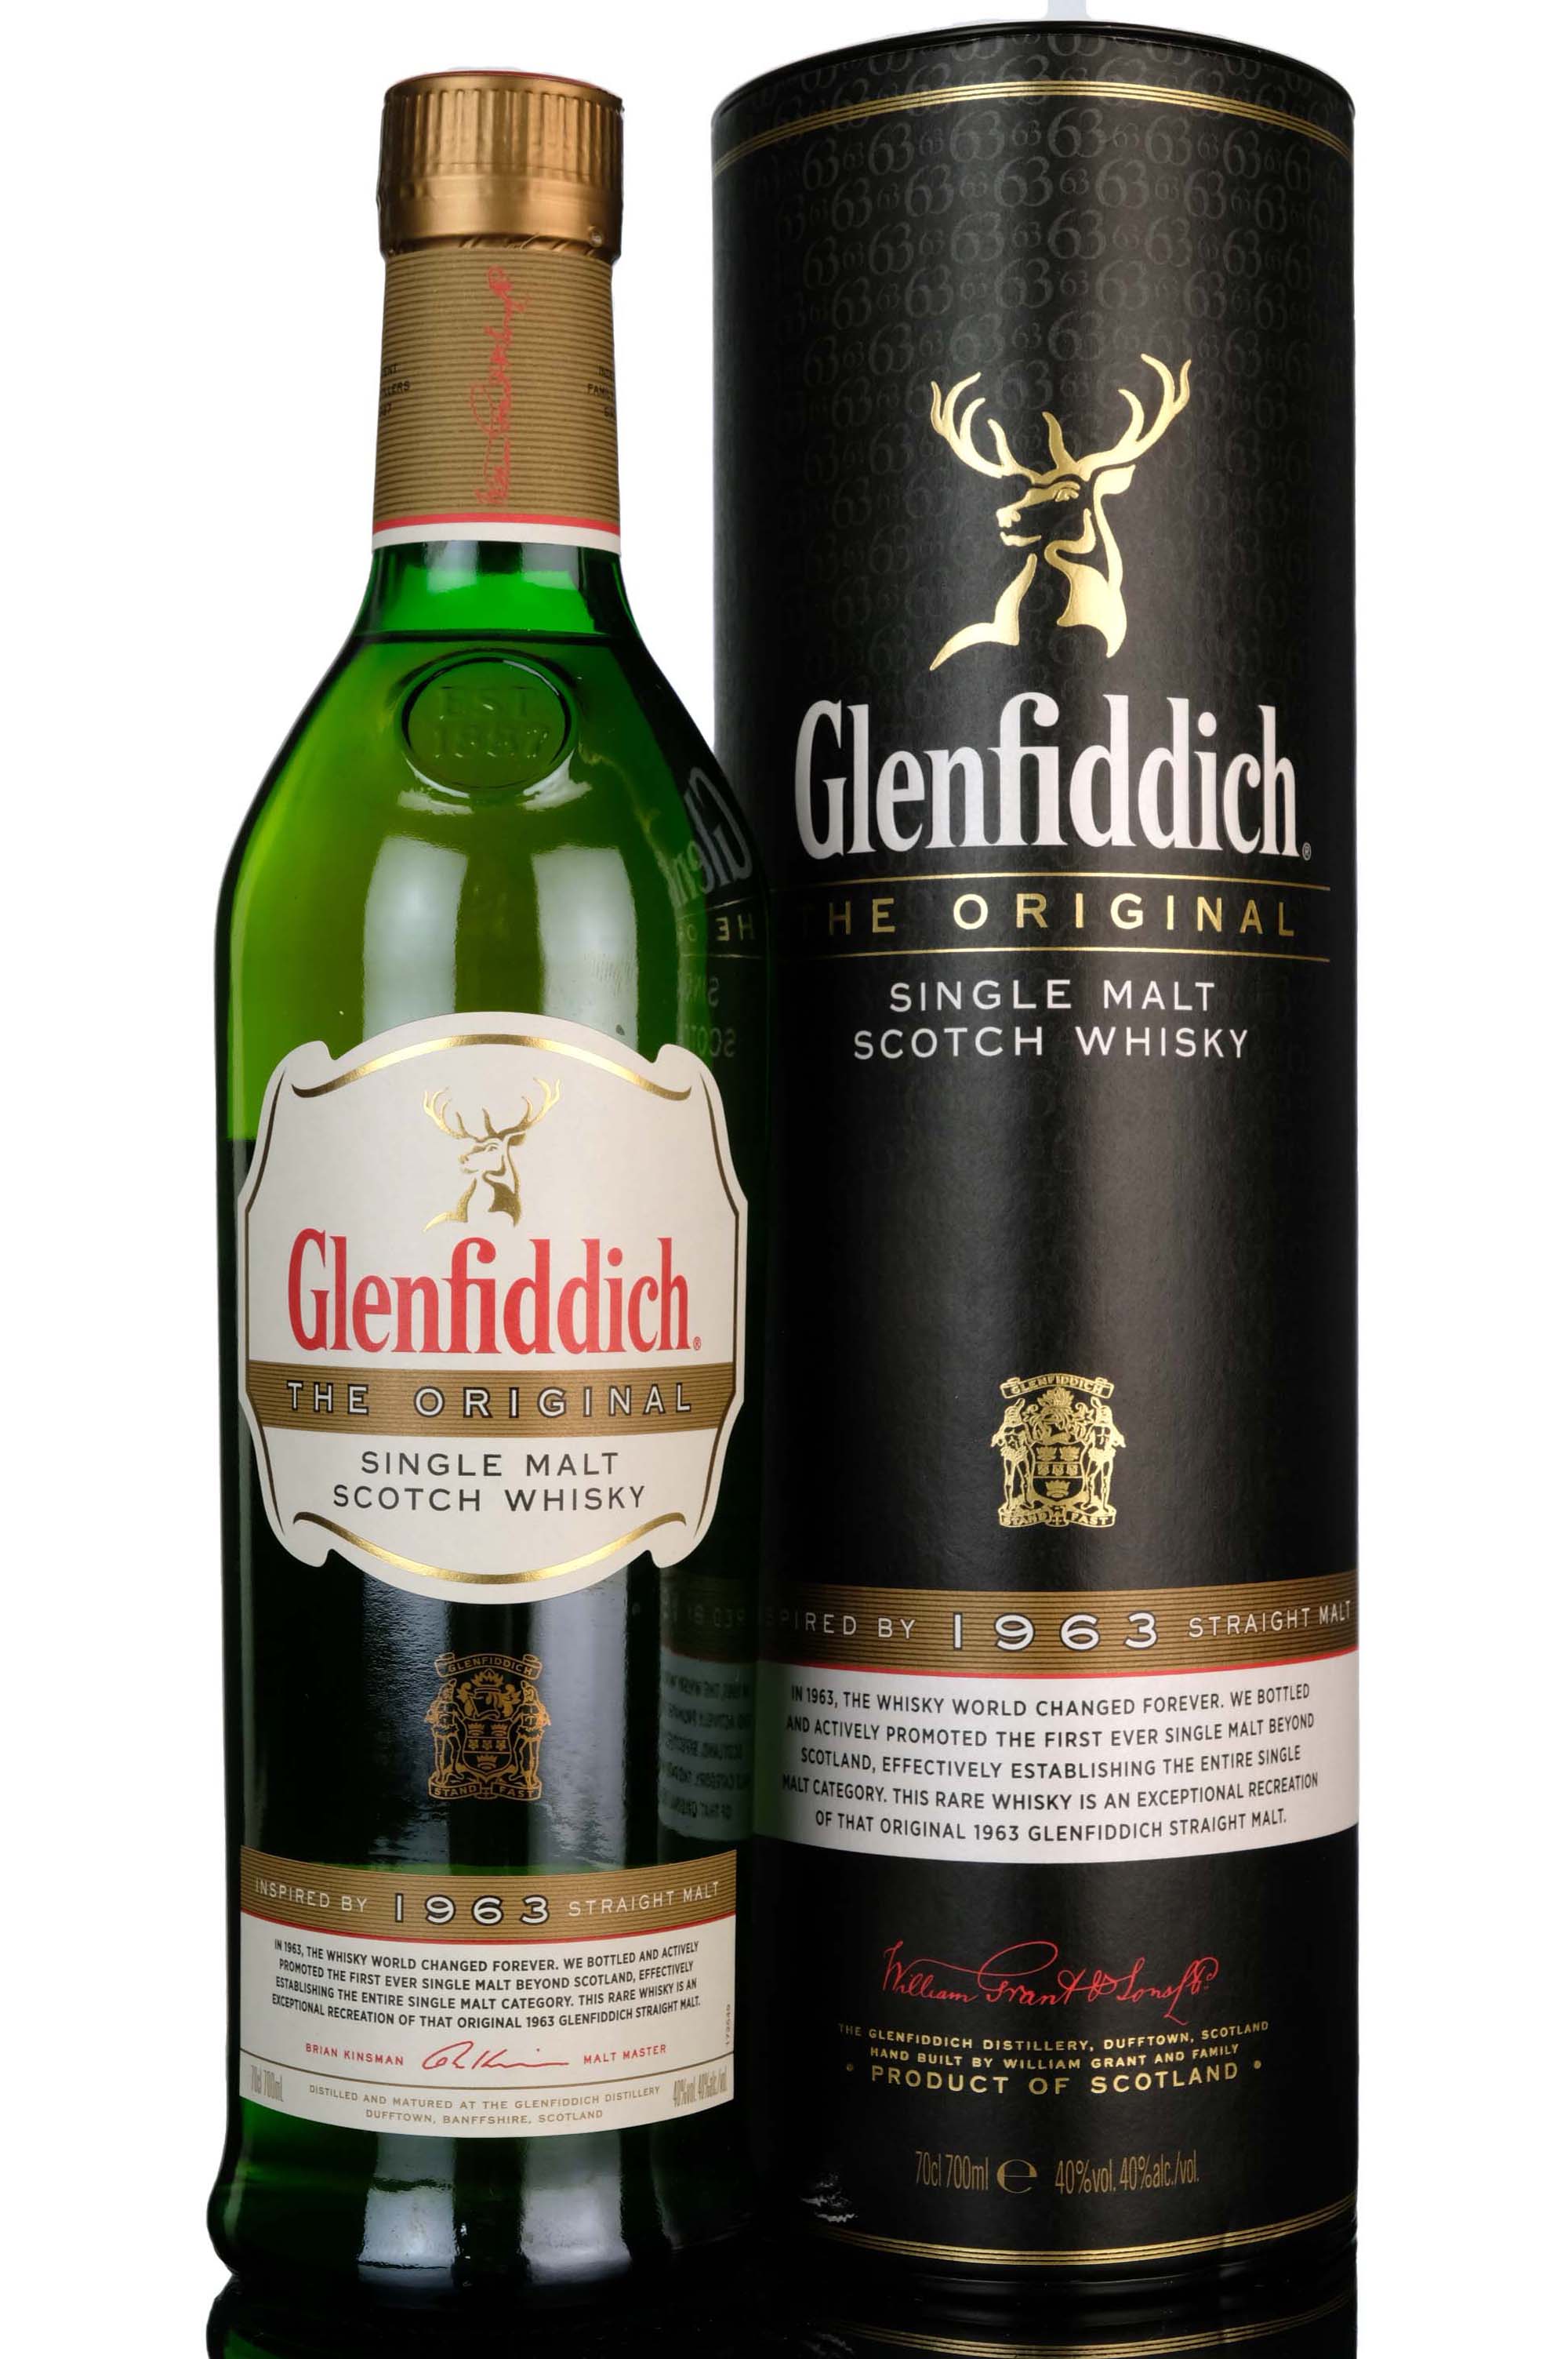 Glenfiddich The Original - Inspired by 1963 Straight Malt - Taiwanese Import